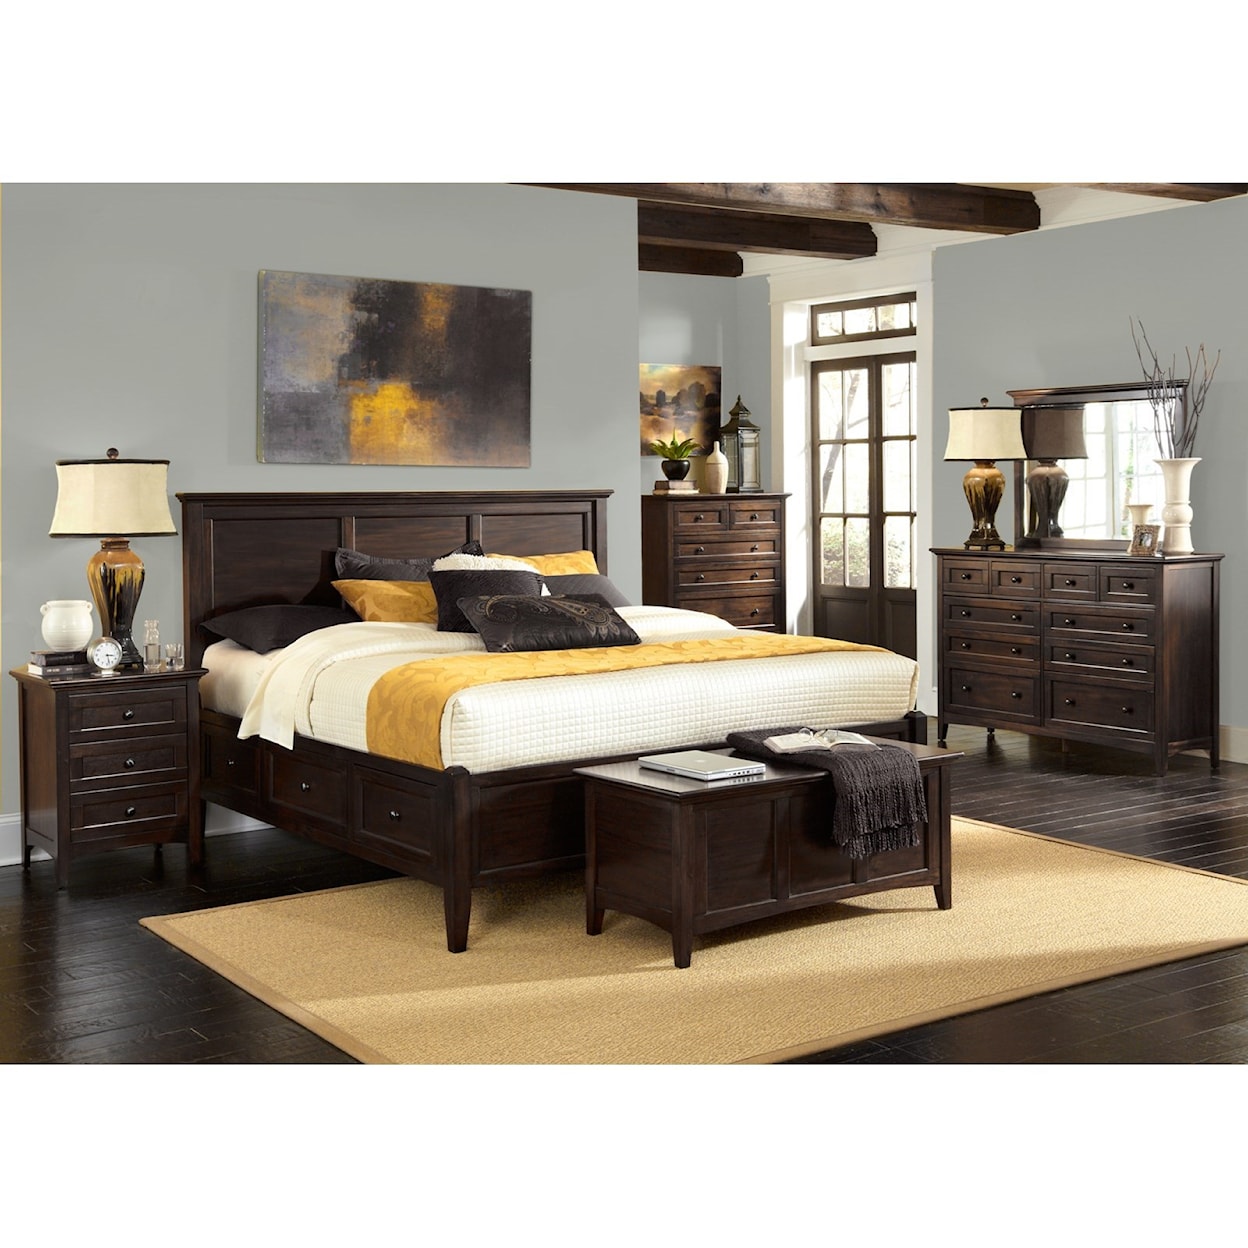 A-A Westlake Queen Storage Bedroom Group